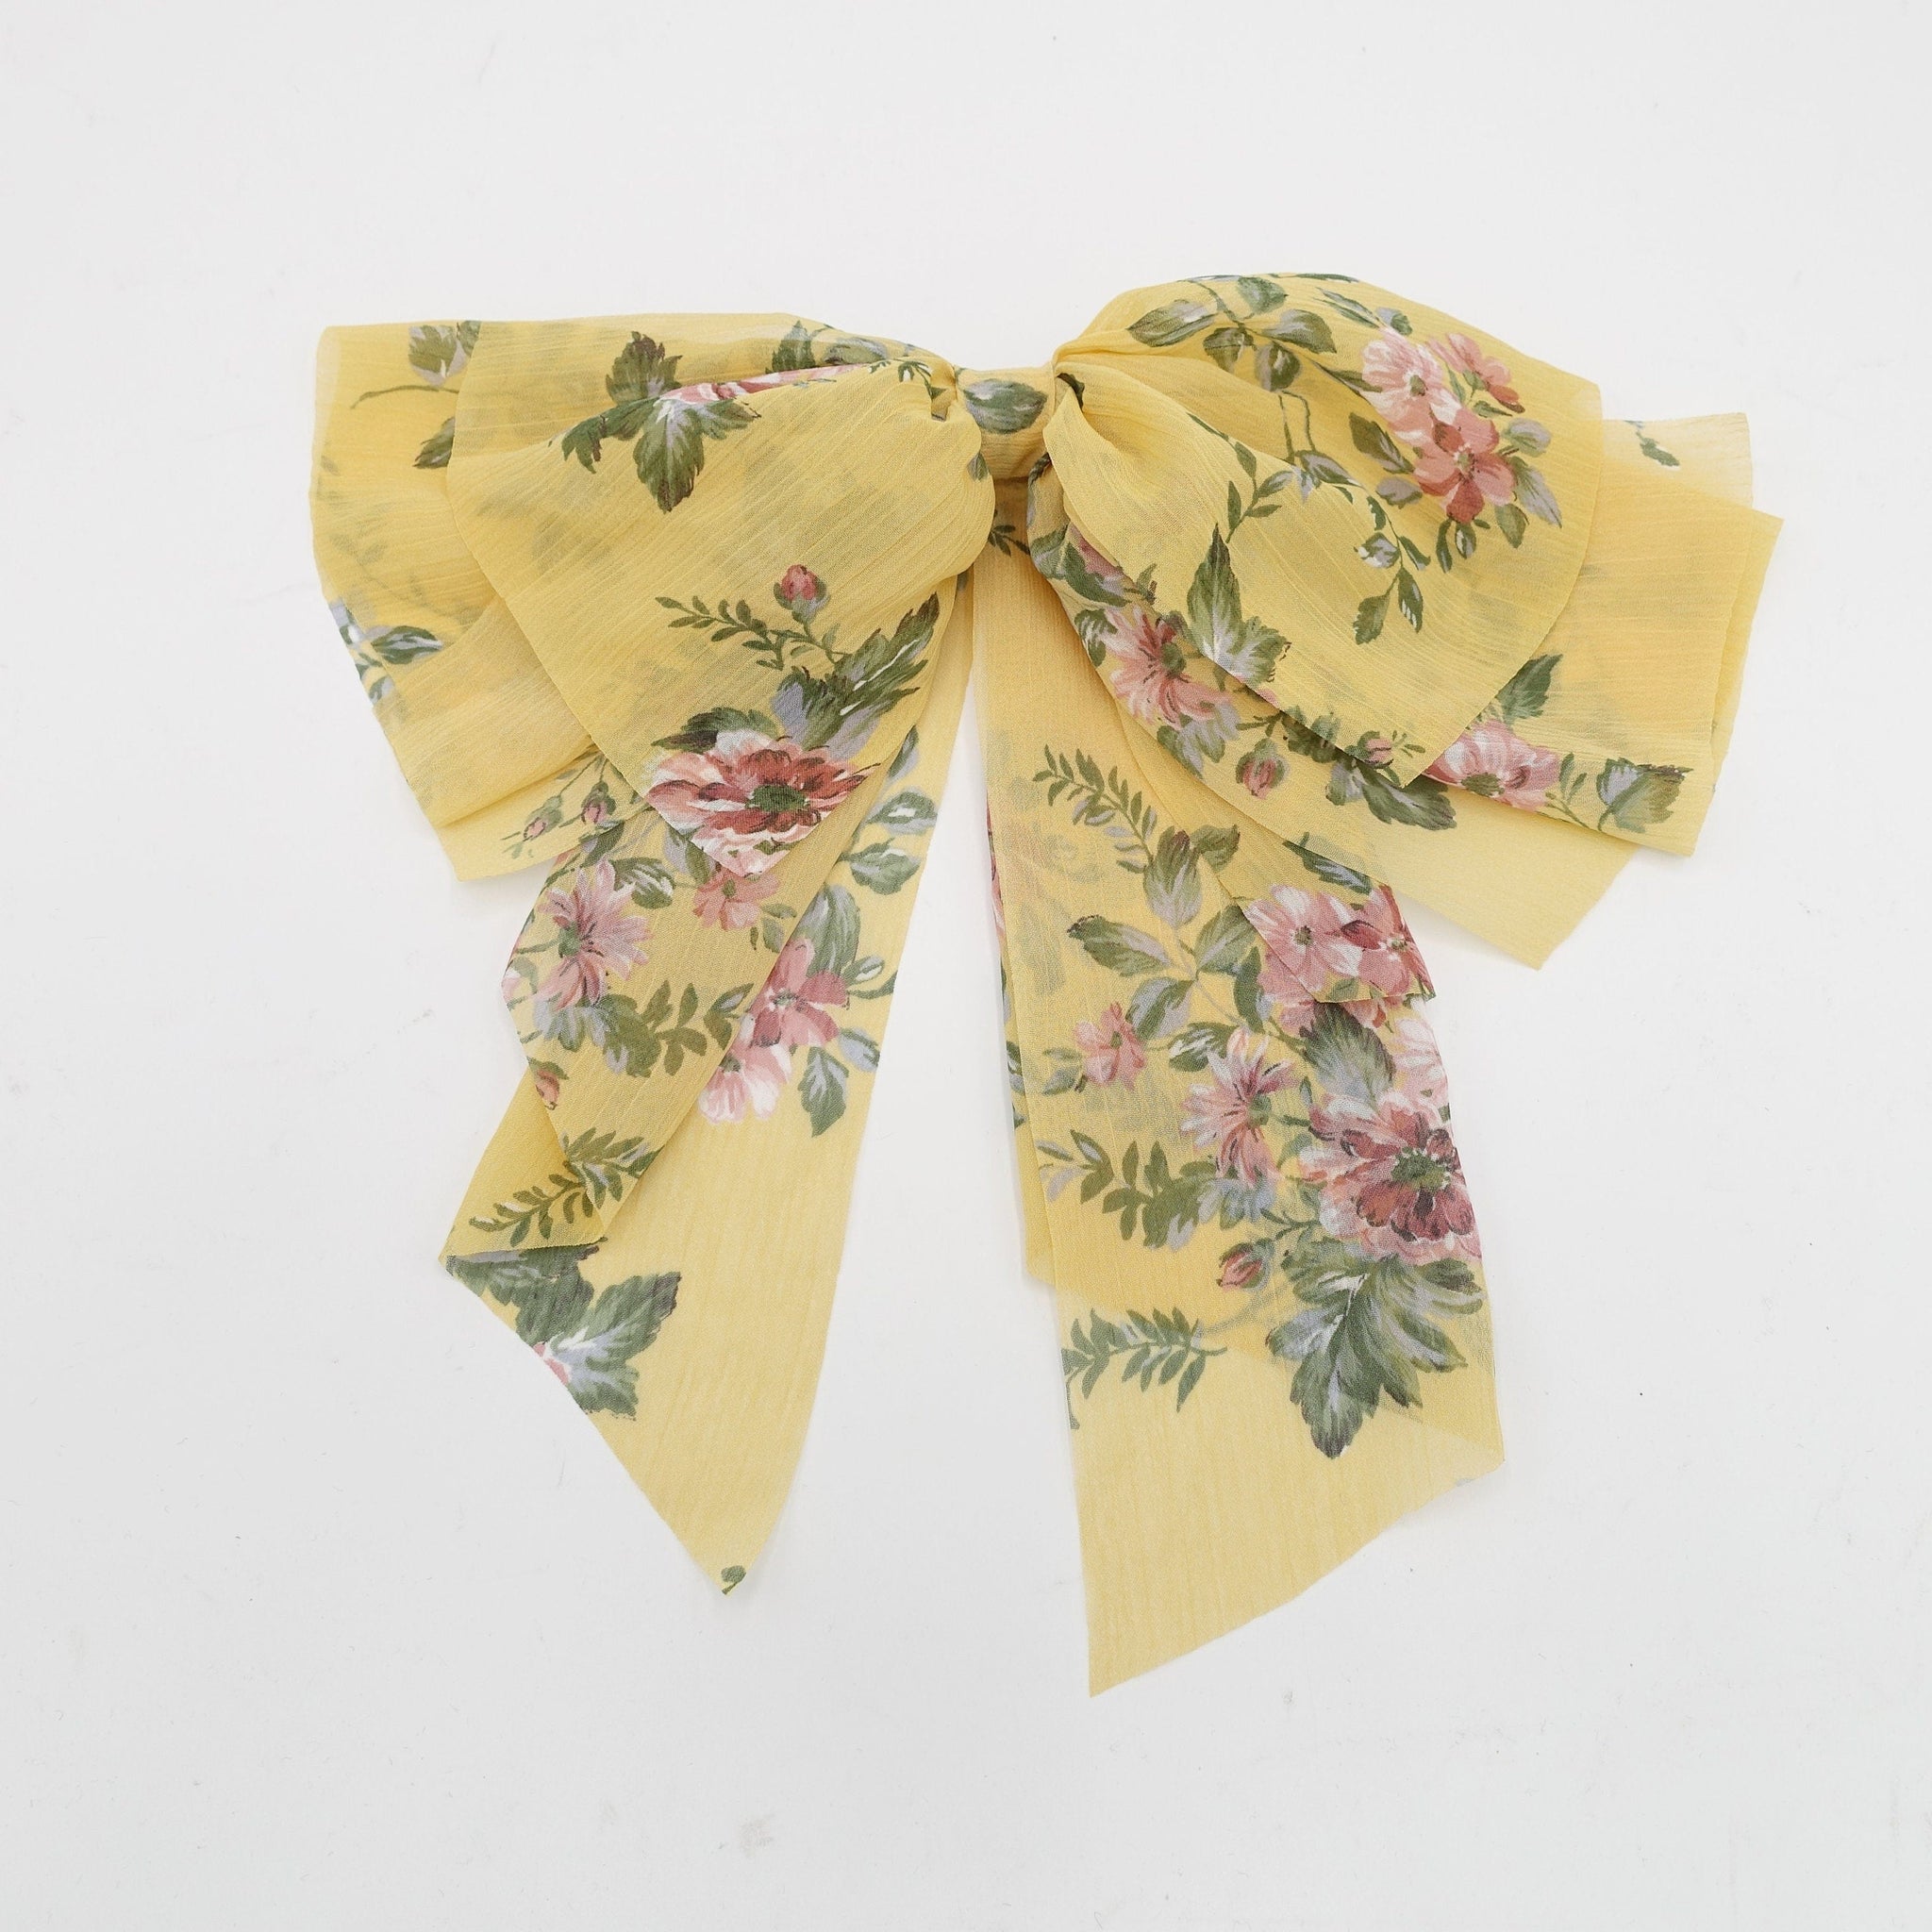 veryshine.com Barrette (Bow) chiffon floral layered hair bow droopy style feminine accessory for women